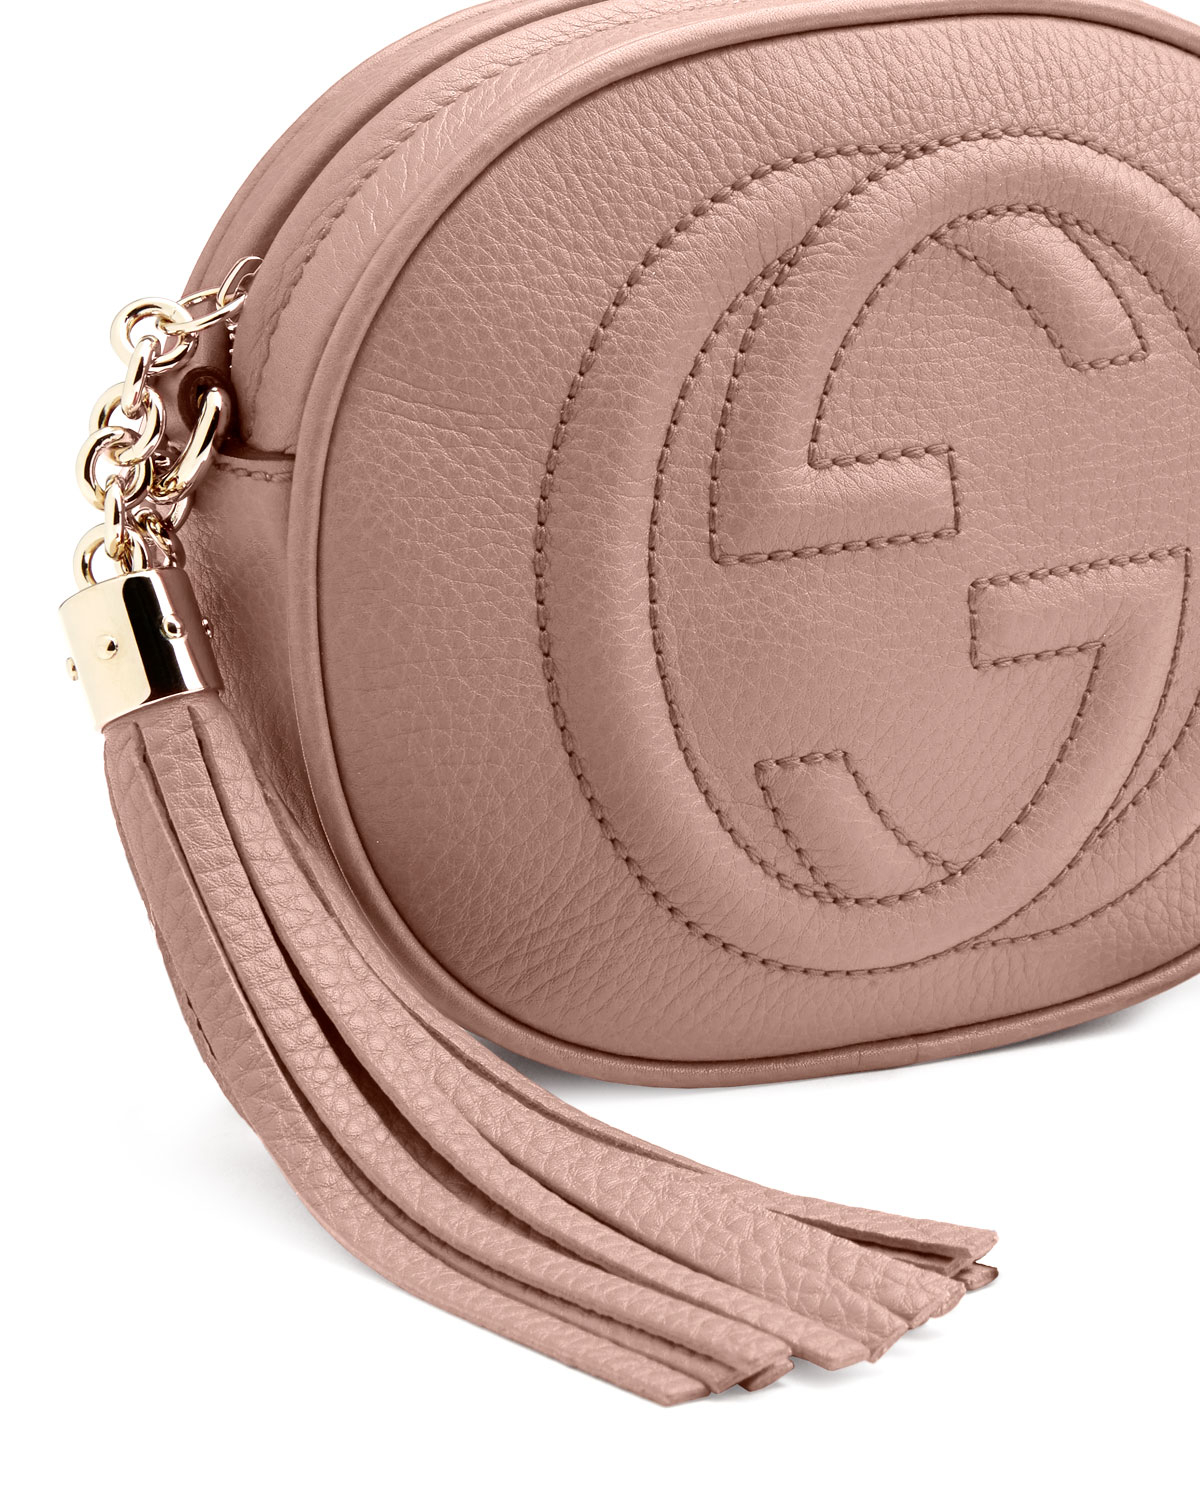 Gucci Soho Leather Mini Chain Bag in Natural - Lyst